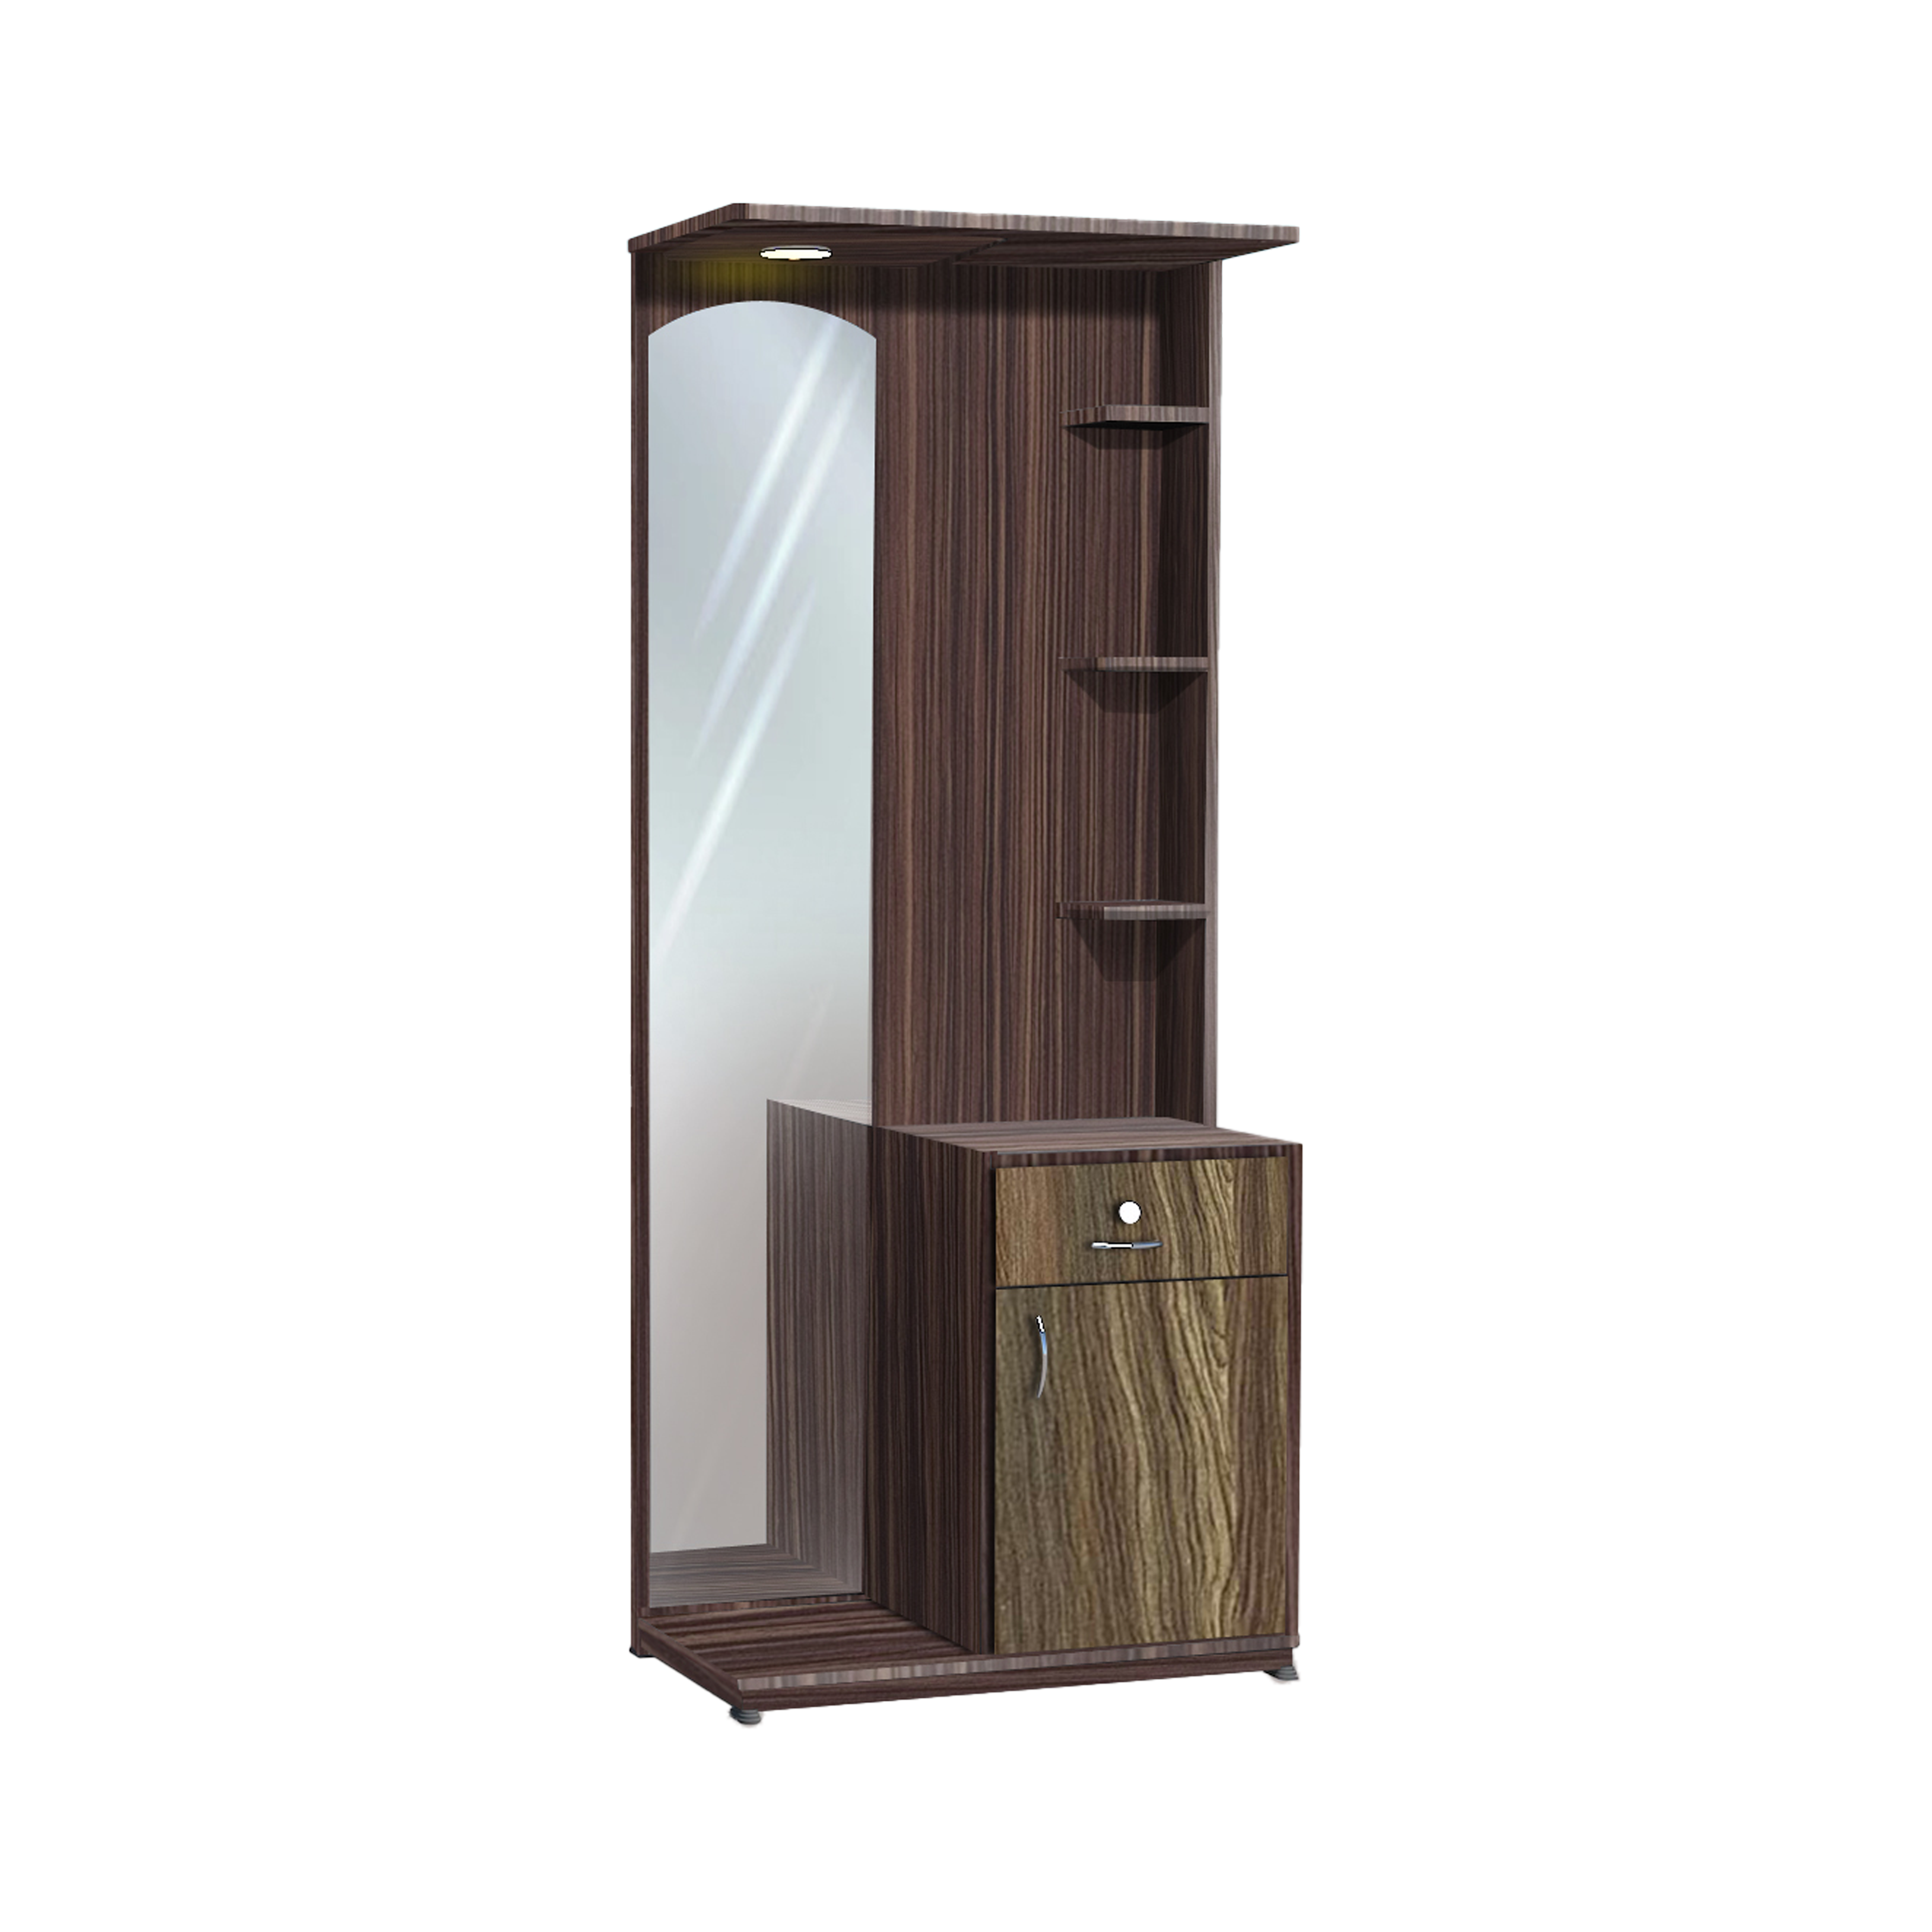 Dressing table - DT009